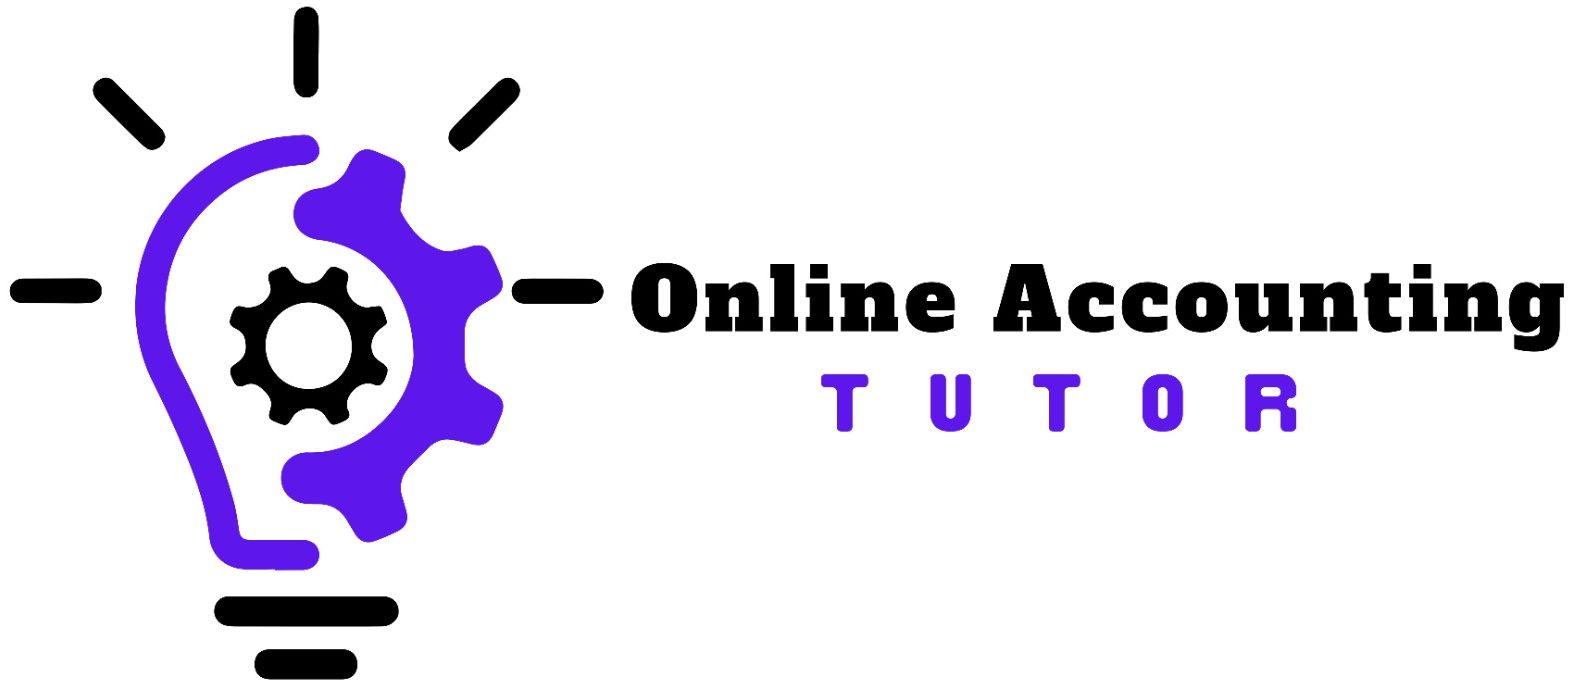 Online Accounting Tutor